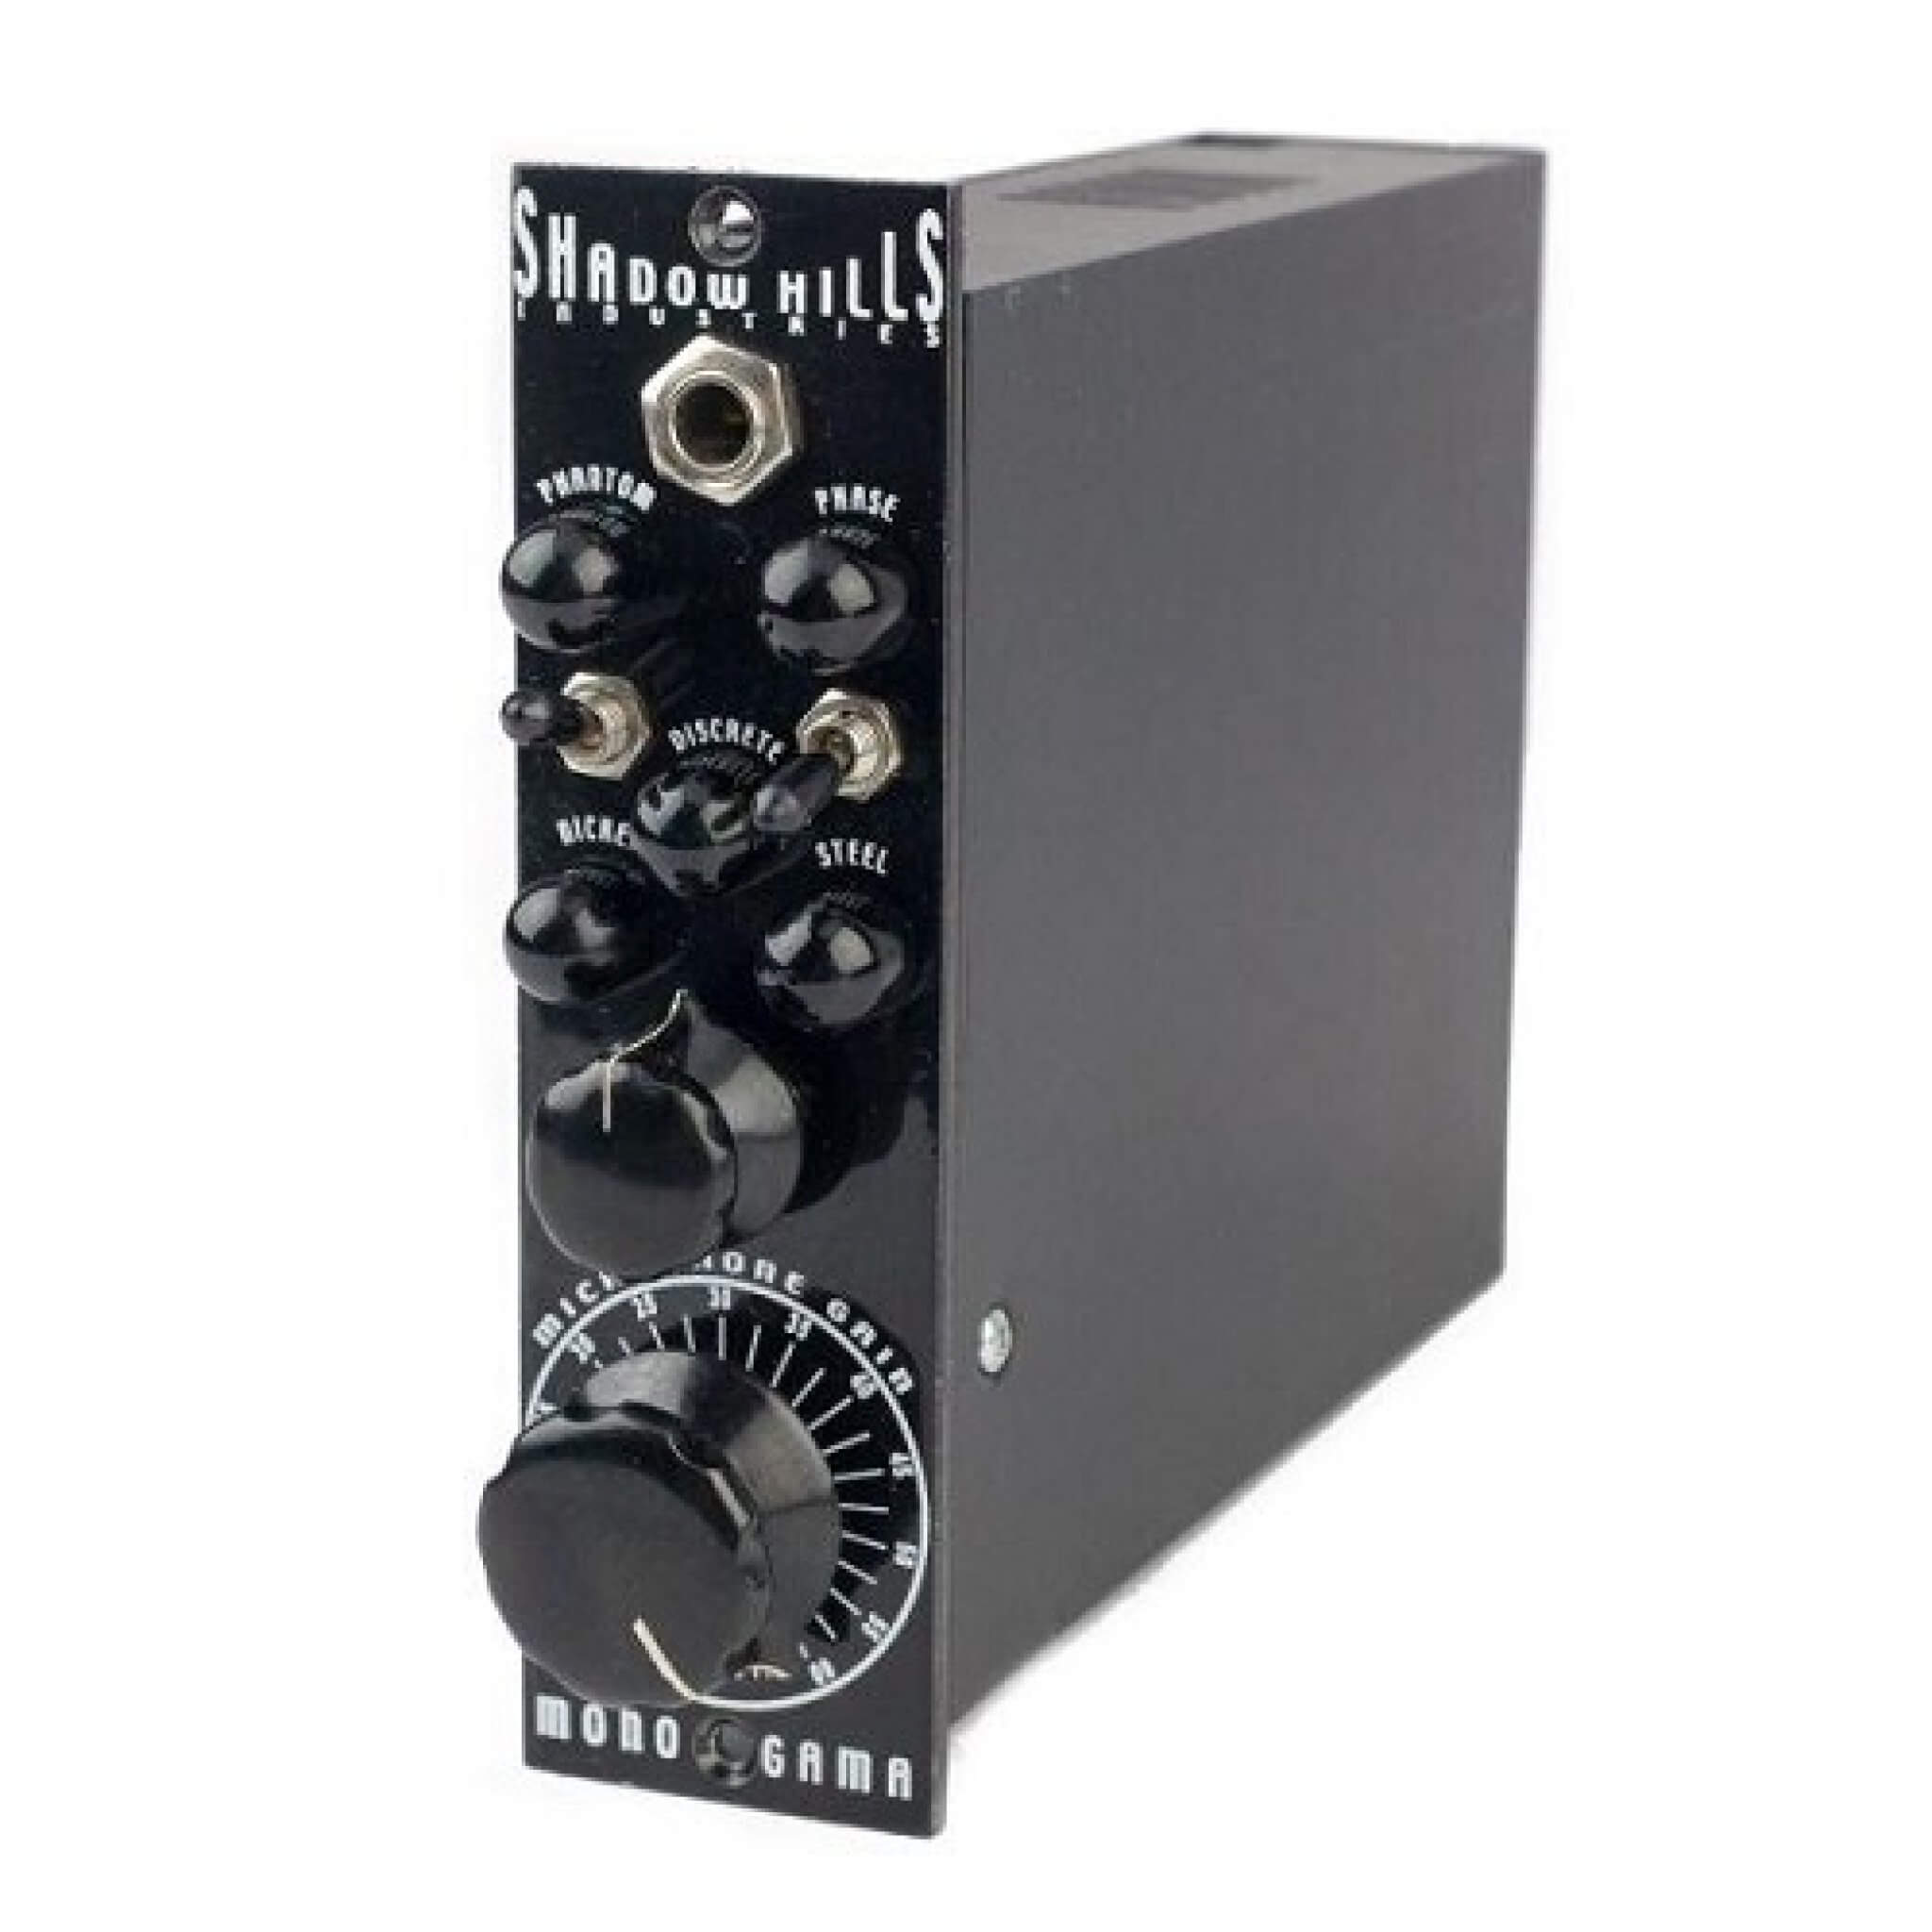 500 Series Preamps: Top 10 Picks and Great Buyers Guide!